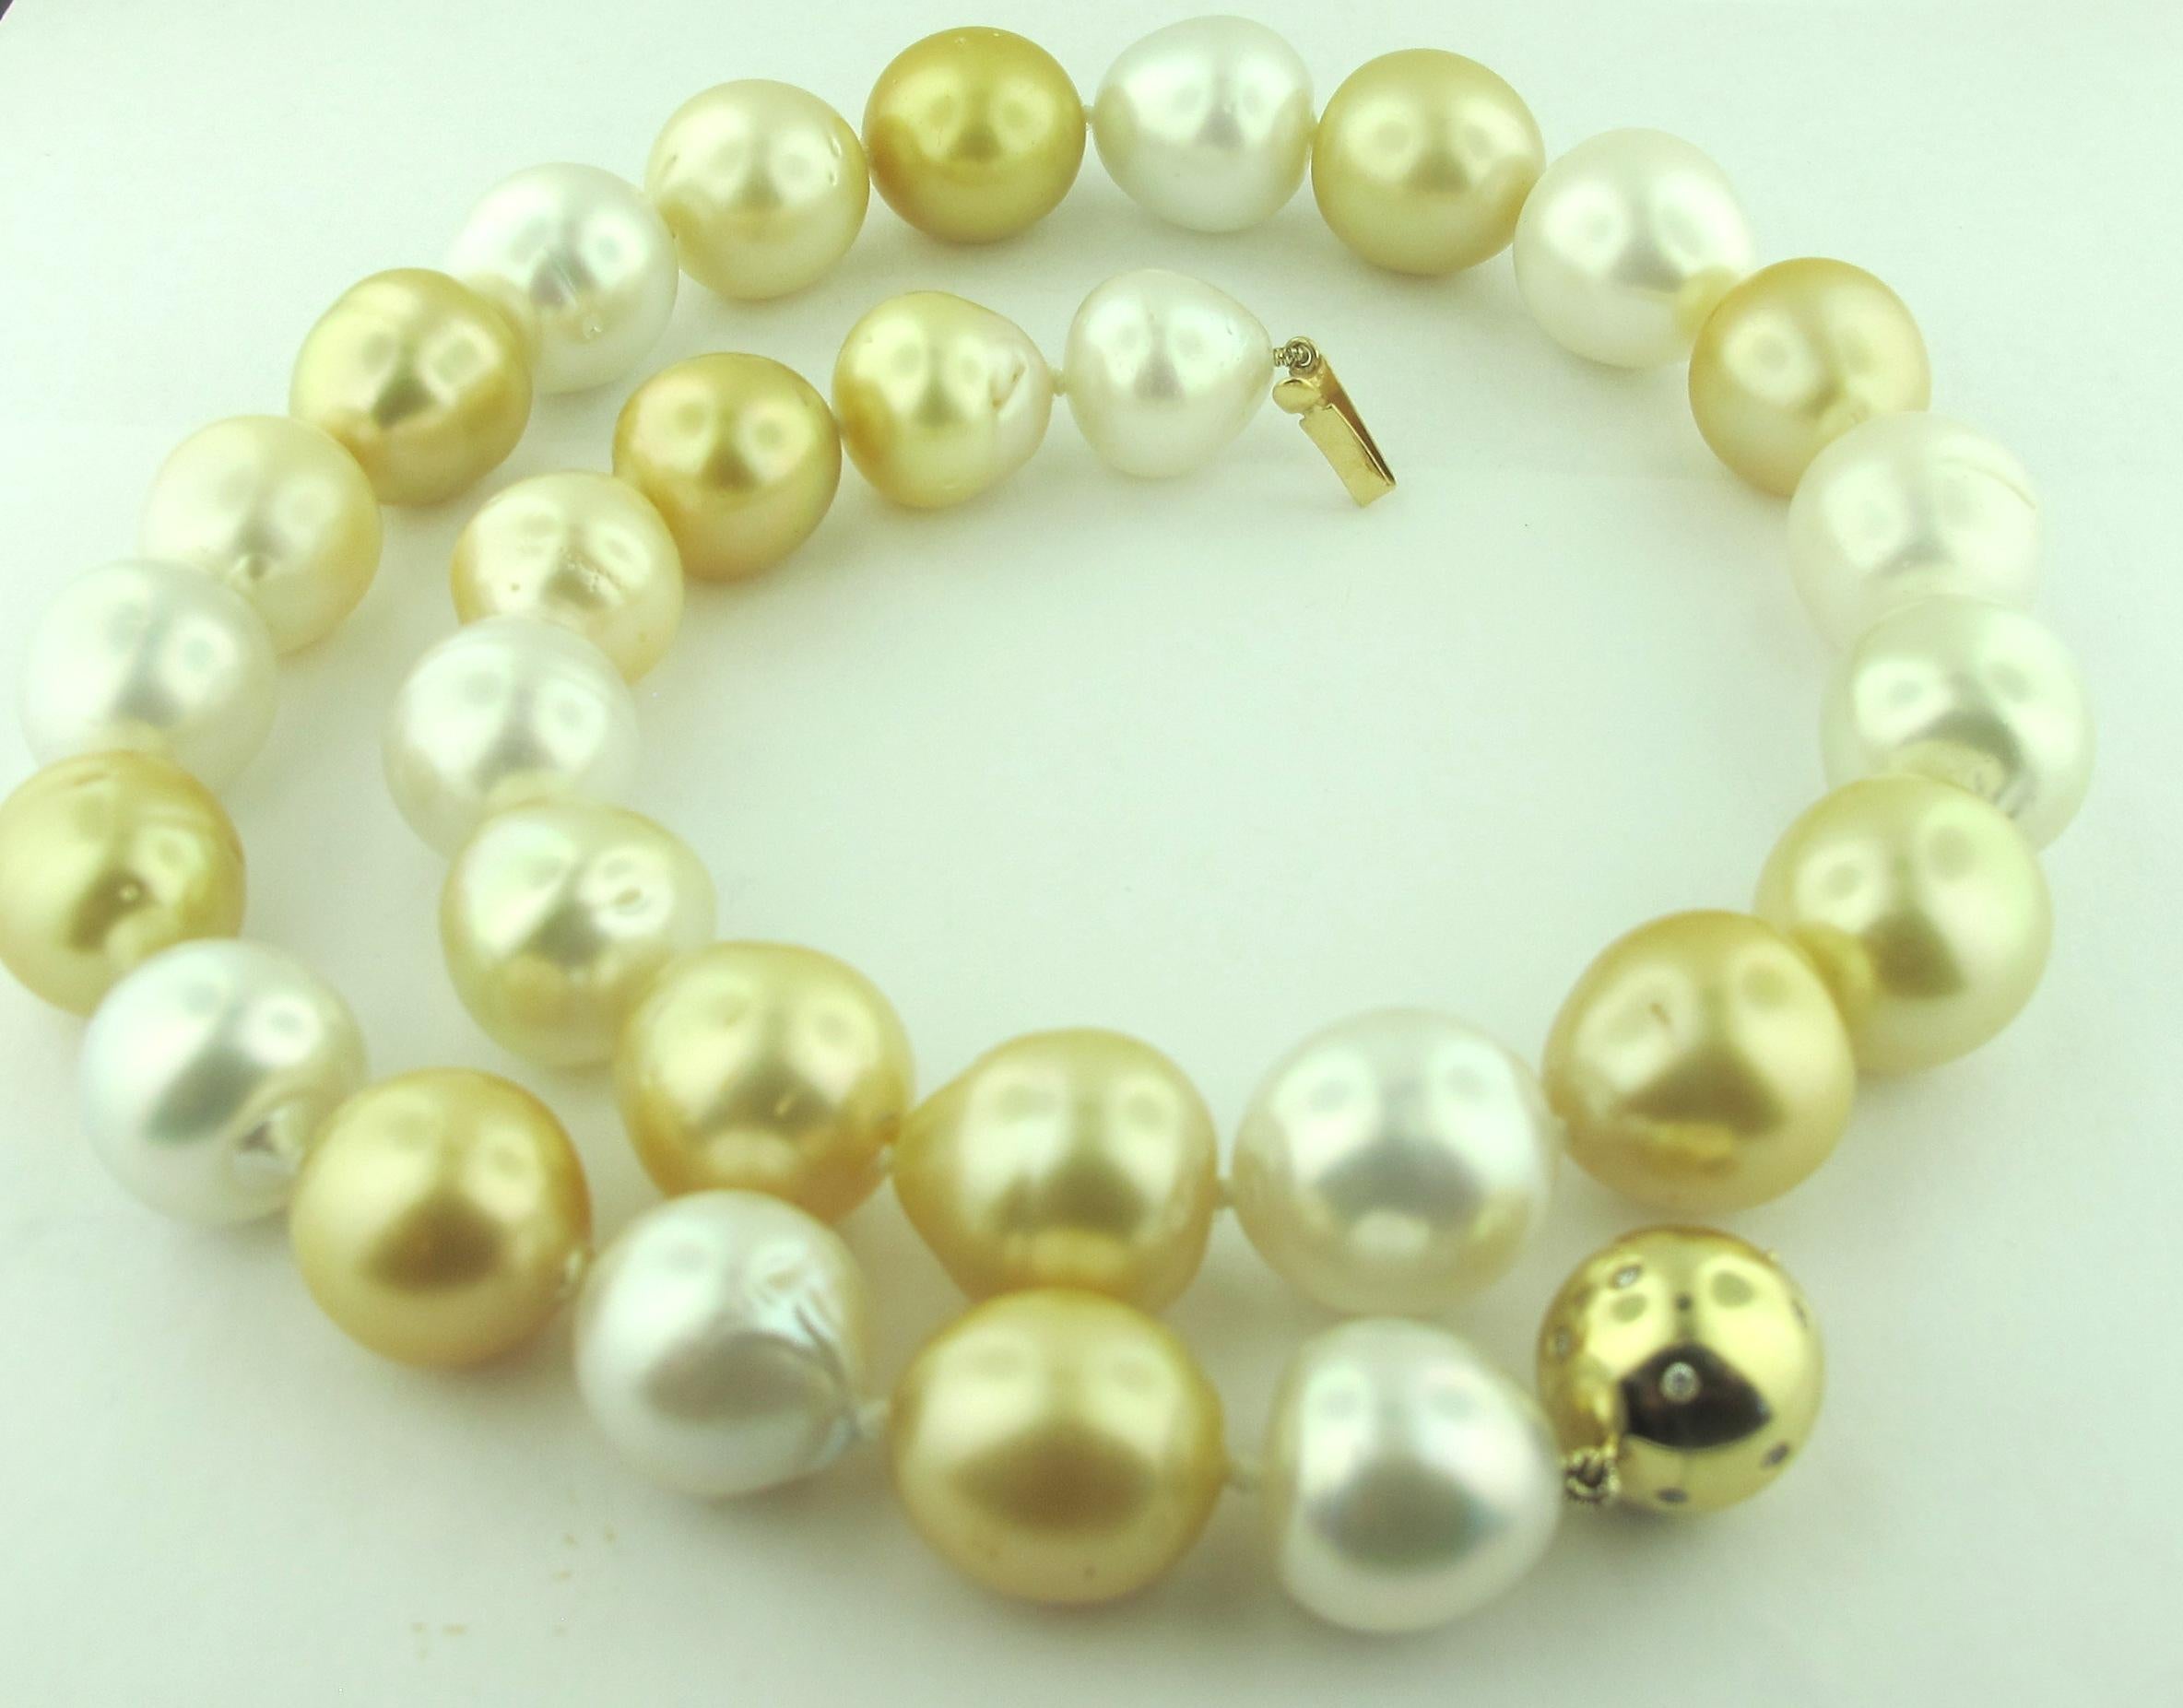 13 to 15 millimeter Golden and White South Sea Pearls with a 14 karat yellow gold ball clasp studded with diamonds.  18